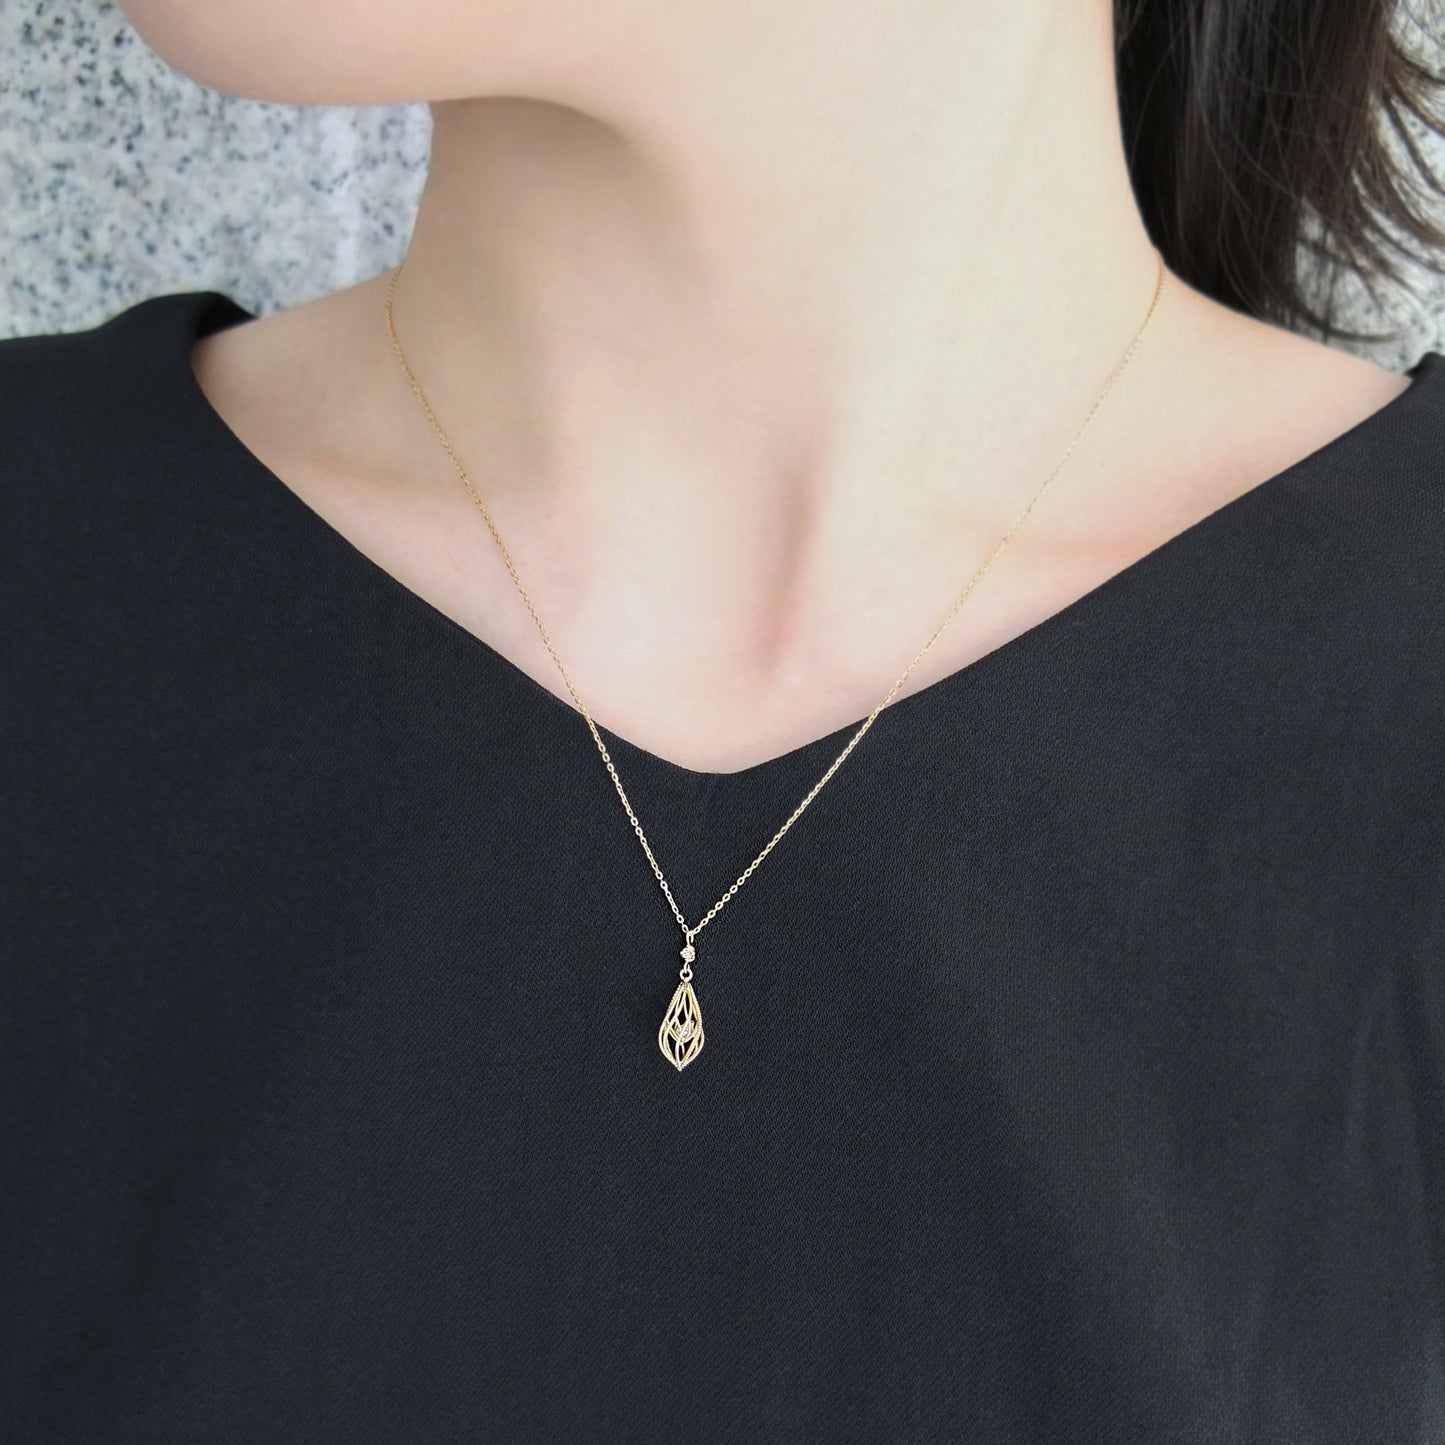 [Pannier] 18K Yellow Gold Floating Cubic Zirconia Necklace - Model Image